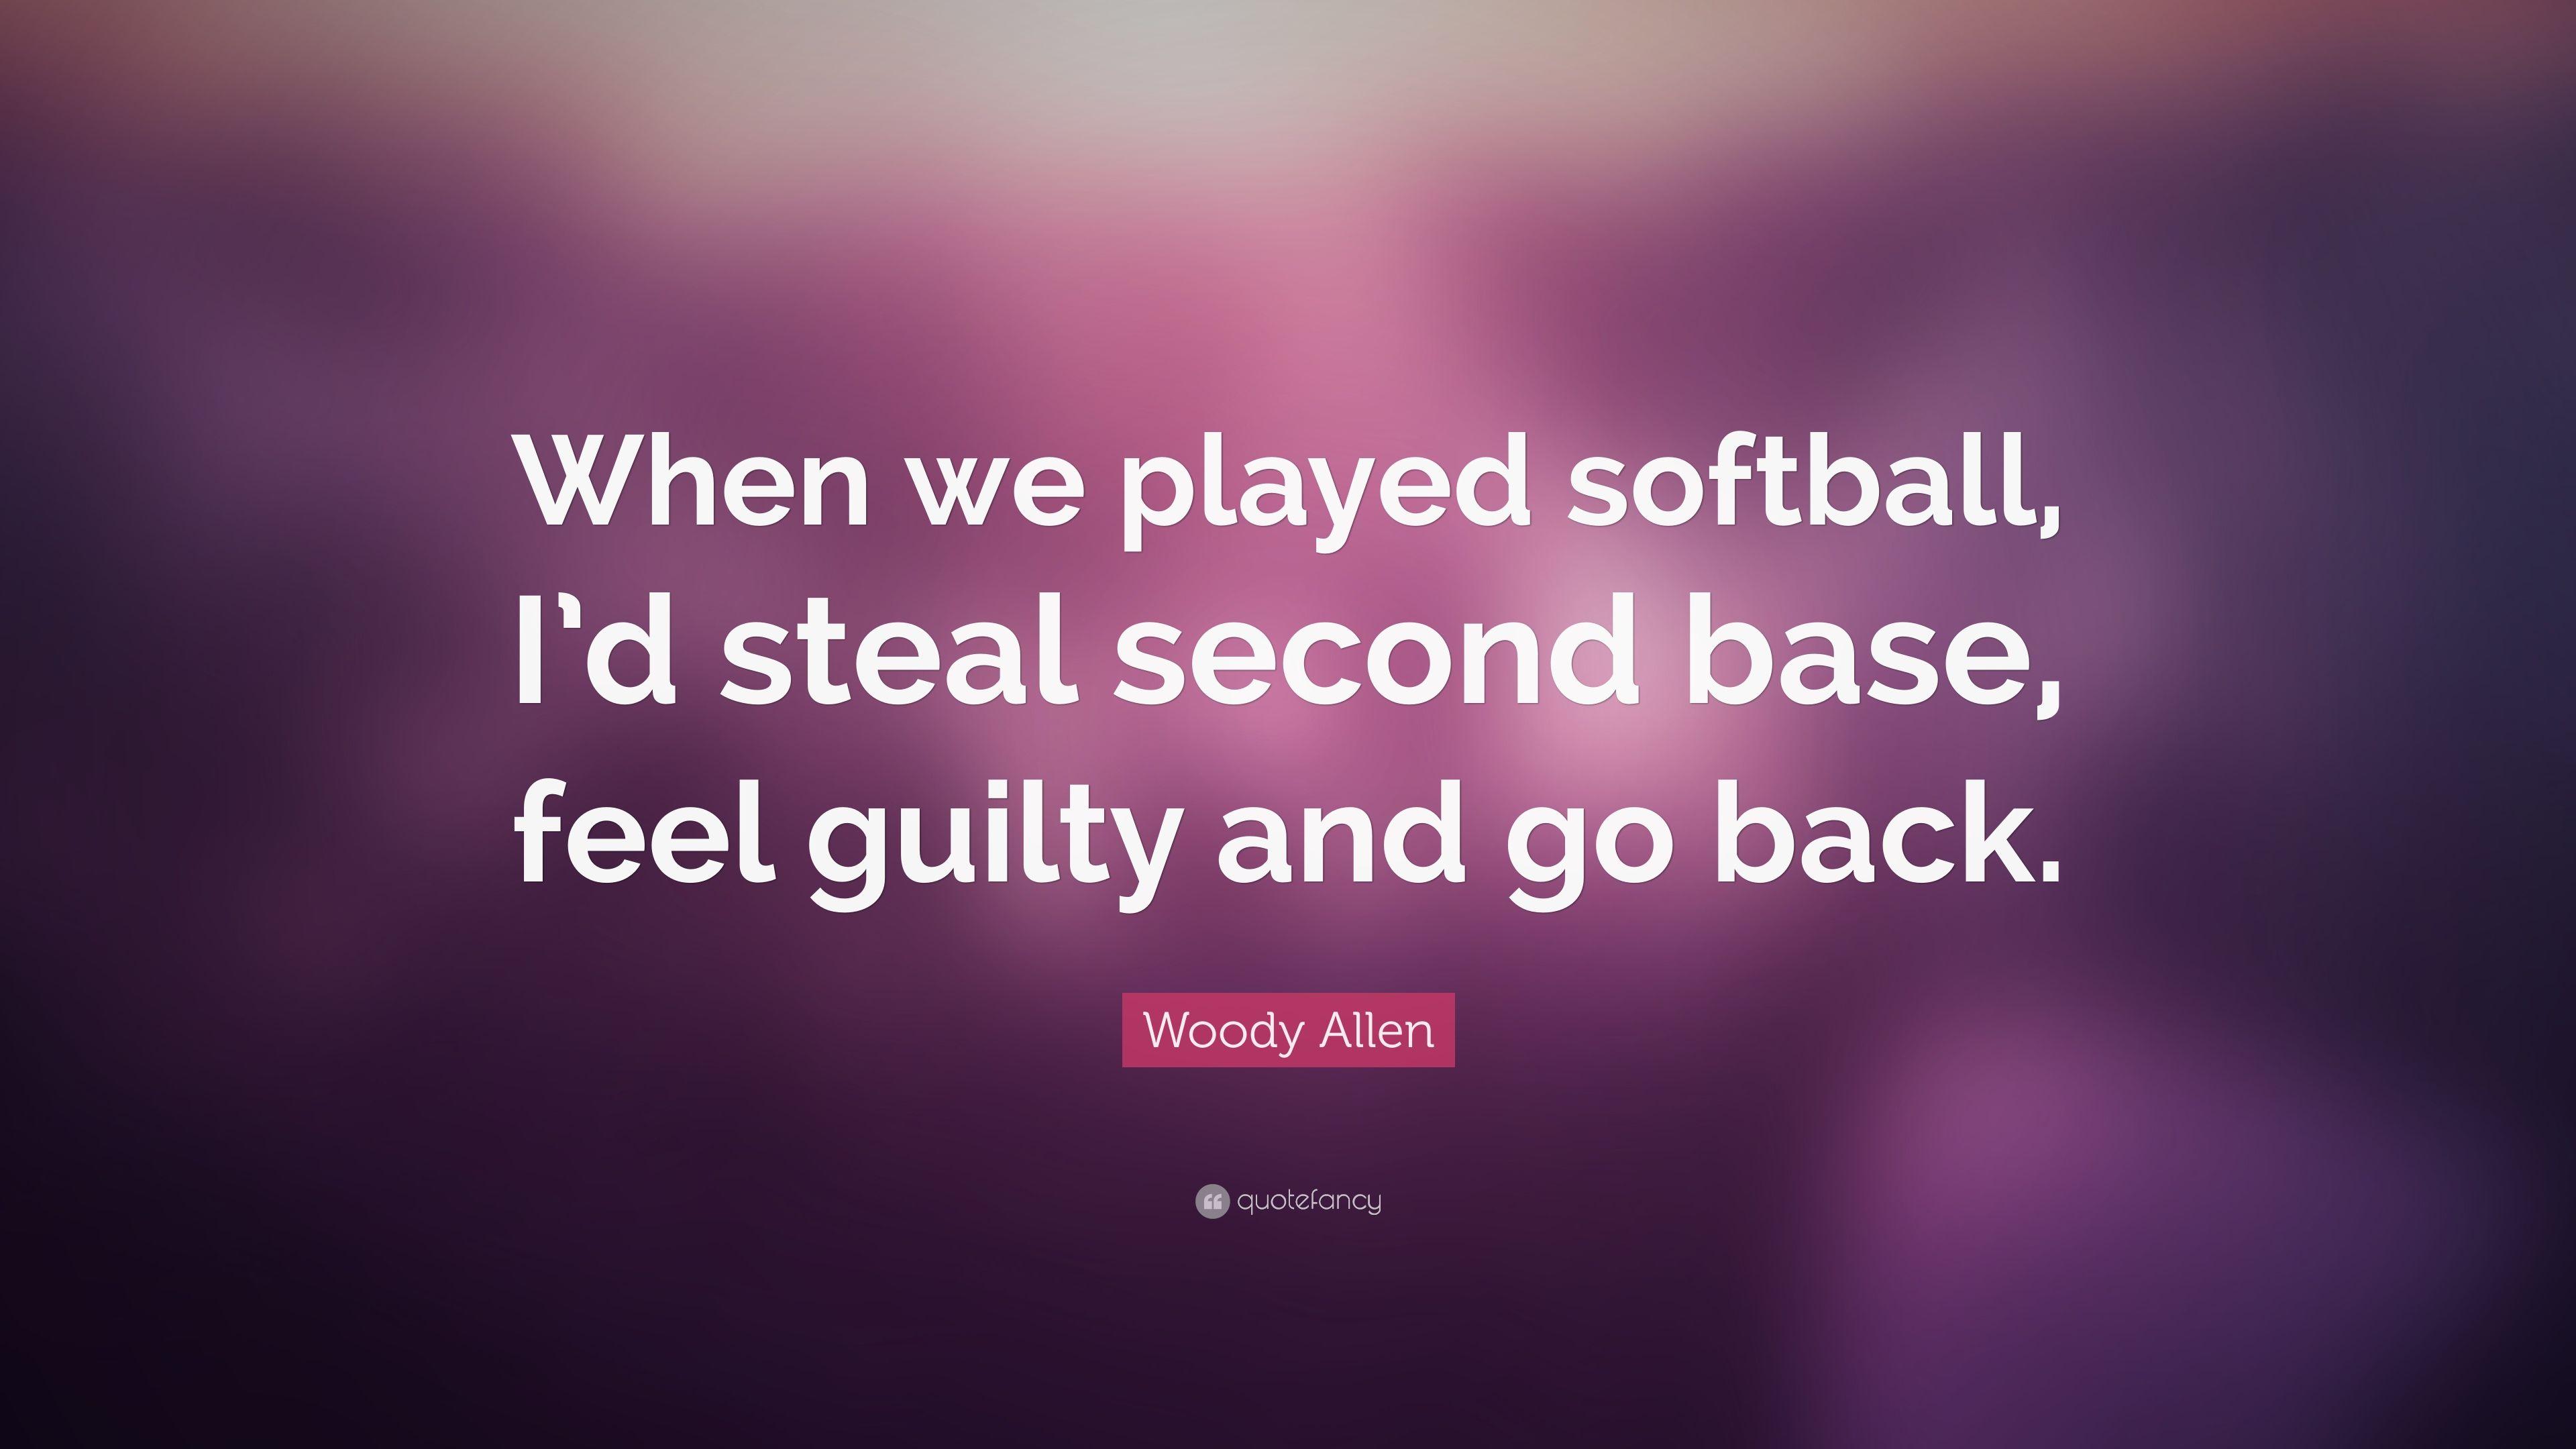 Woody Allen Quote: “When we played softball, I'd steal second base